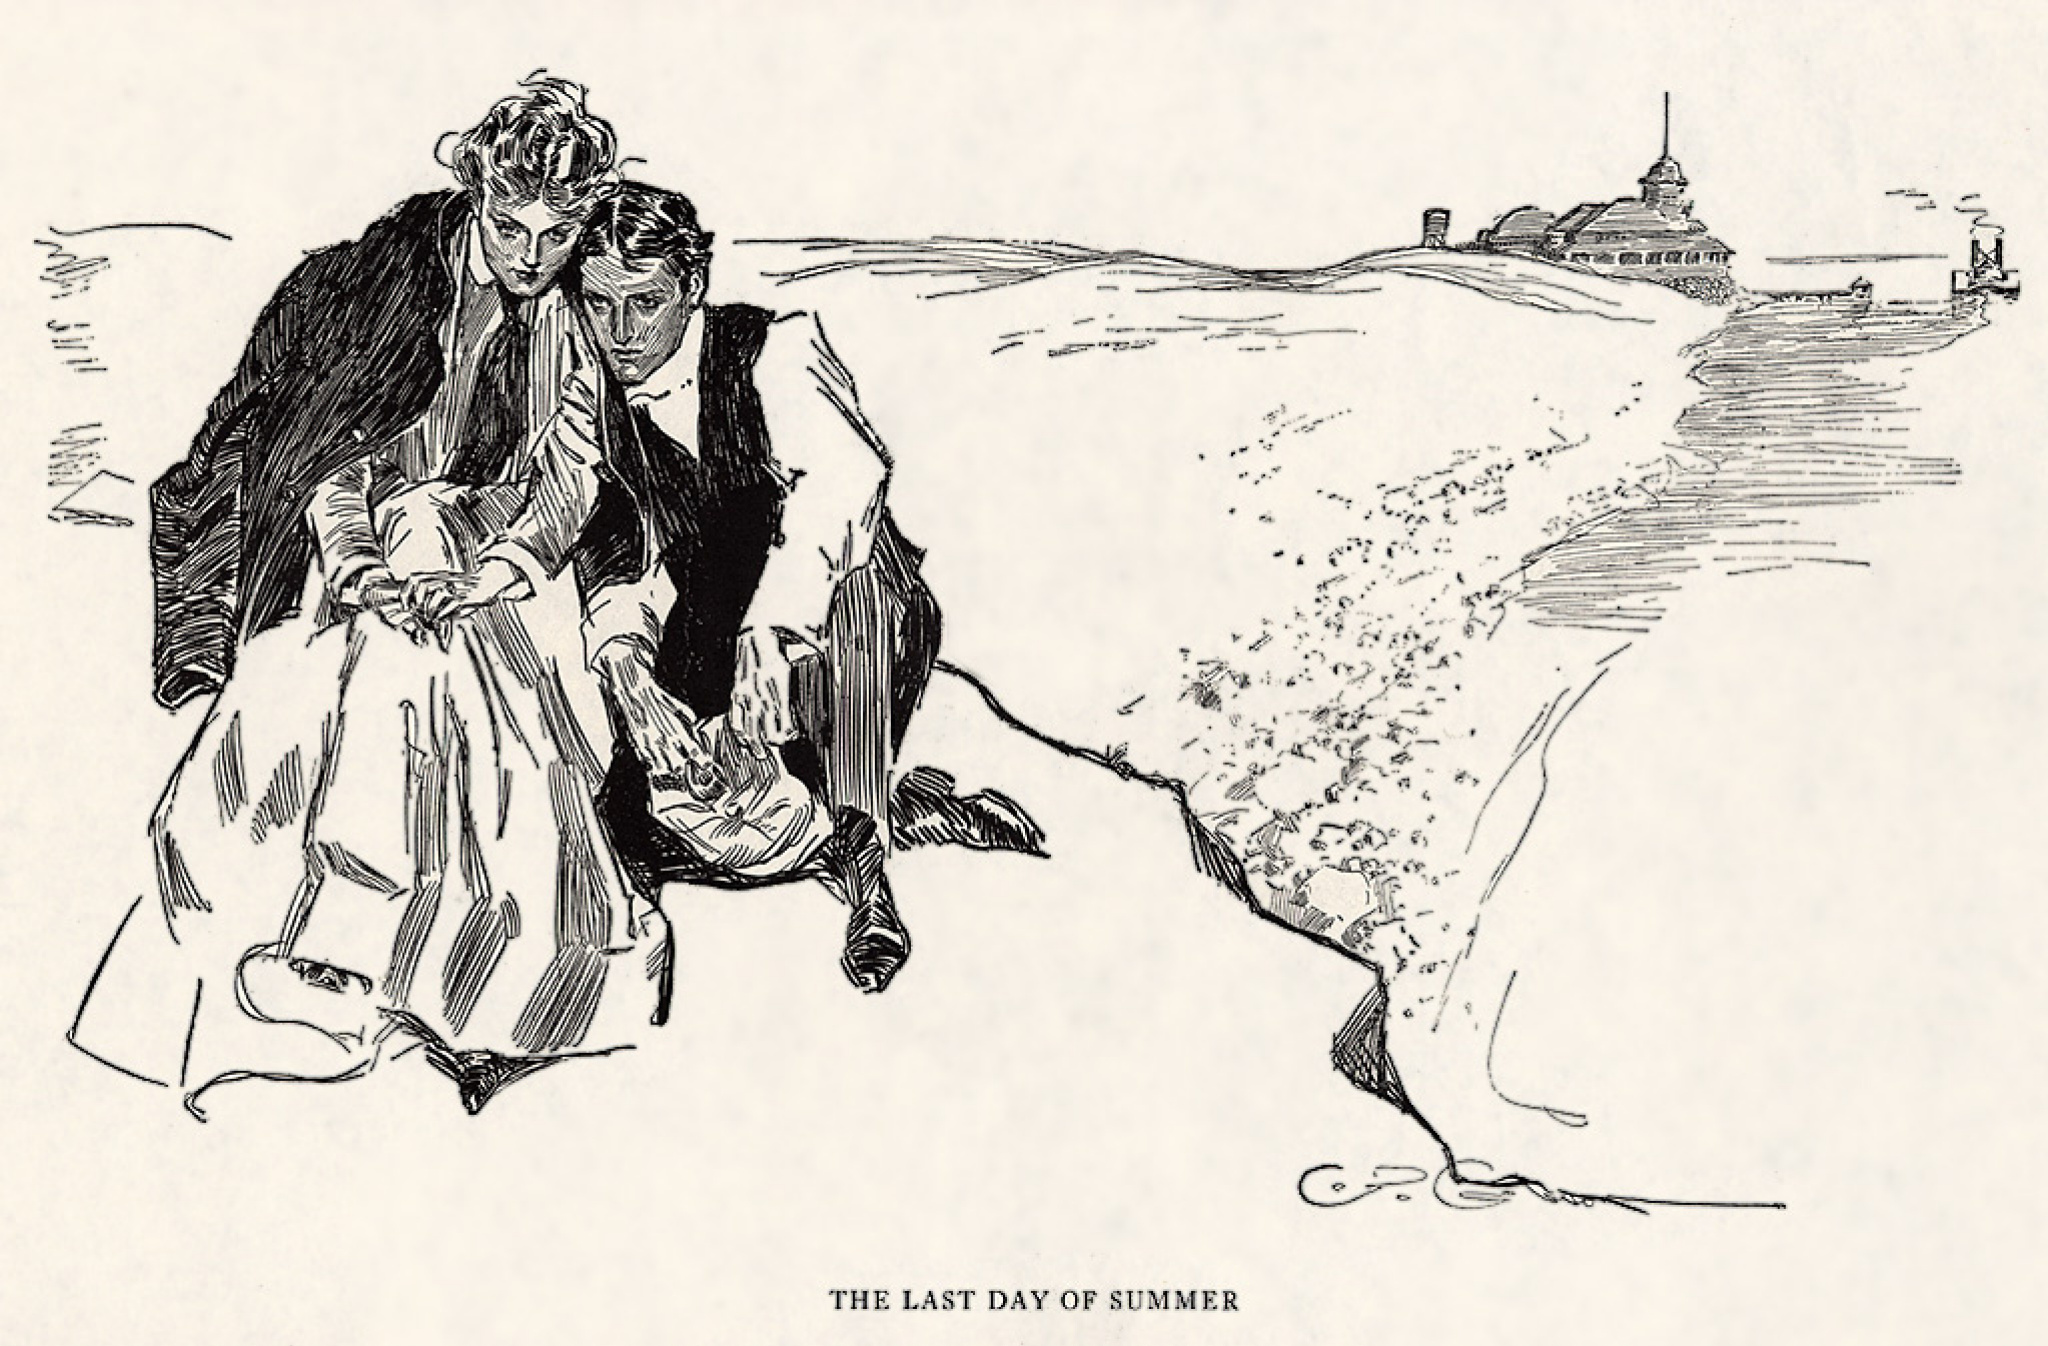 Last day of summer by Charles Dana Gibson: History, Analysis & Facts